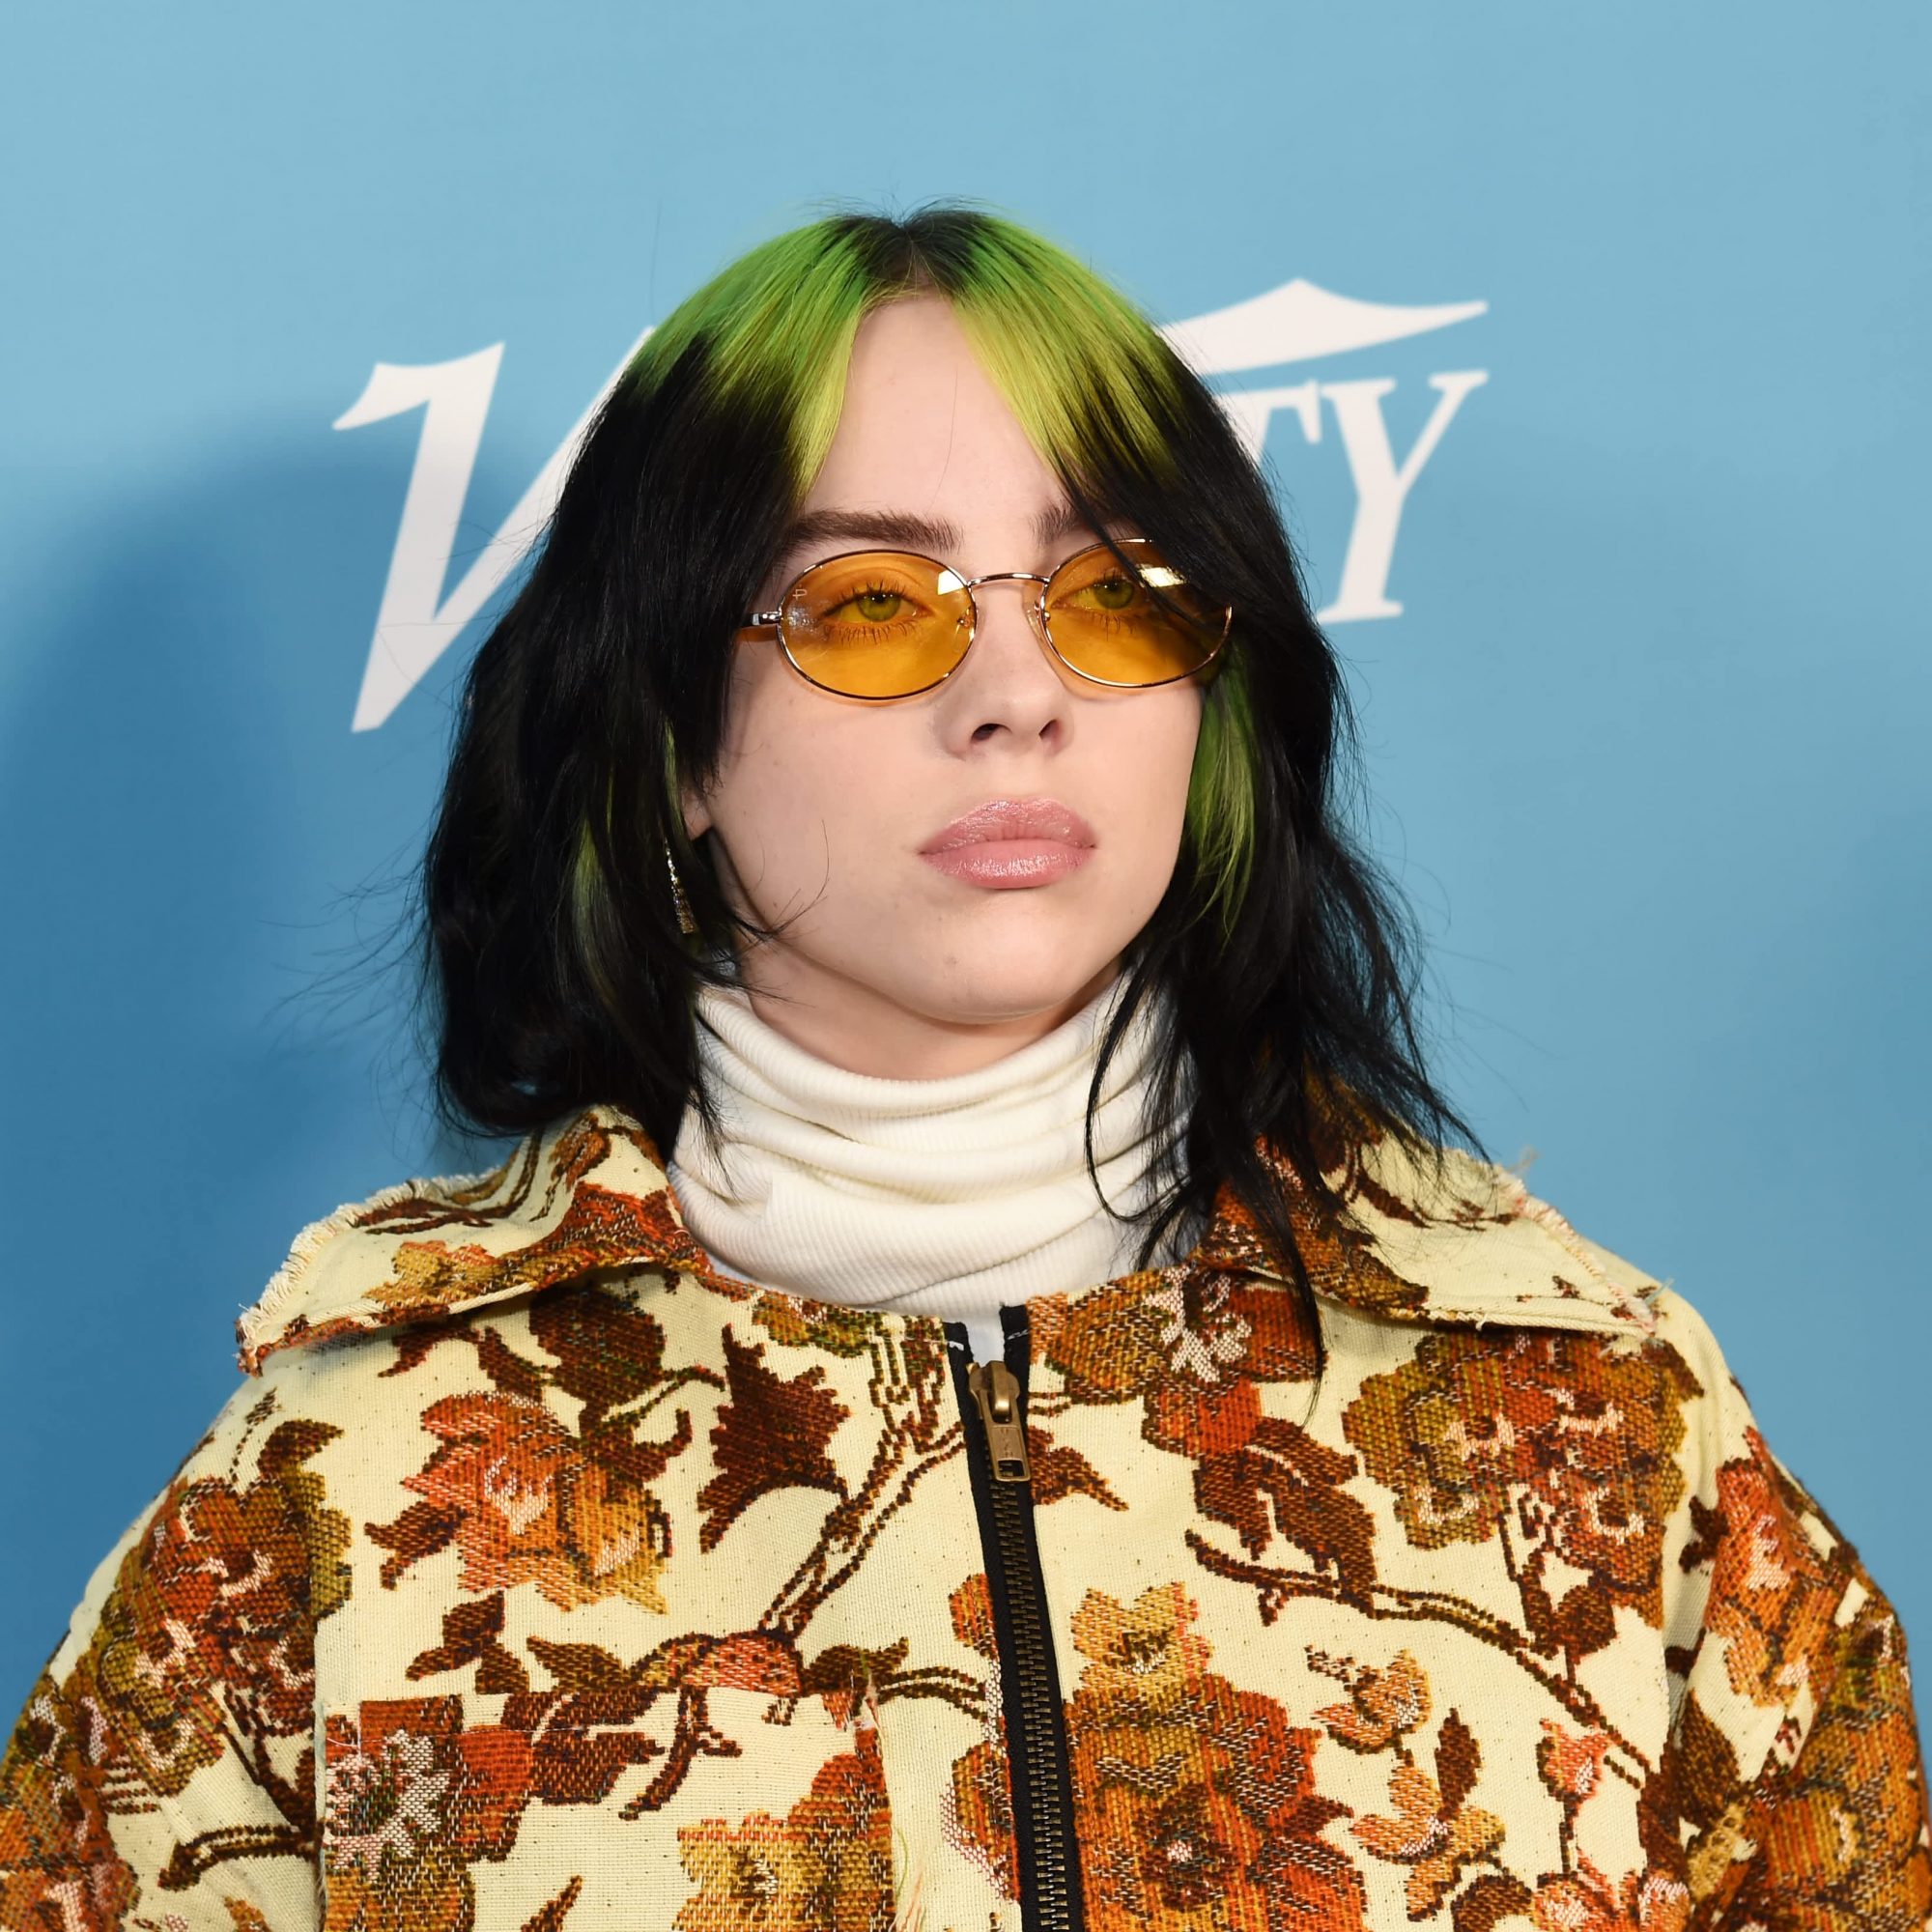 Billie Eilish Gets Real About Mental Health and Body Image Struggles in